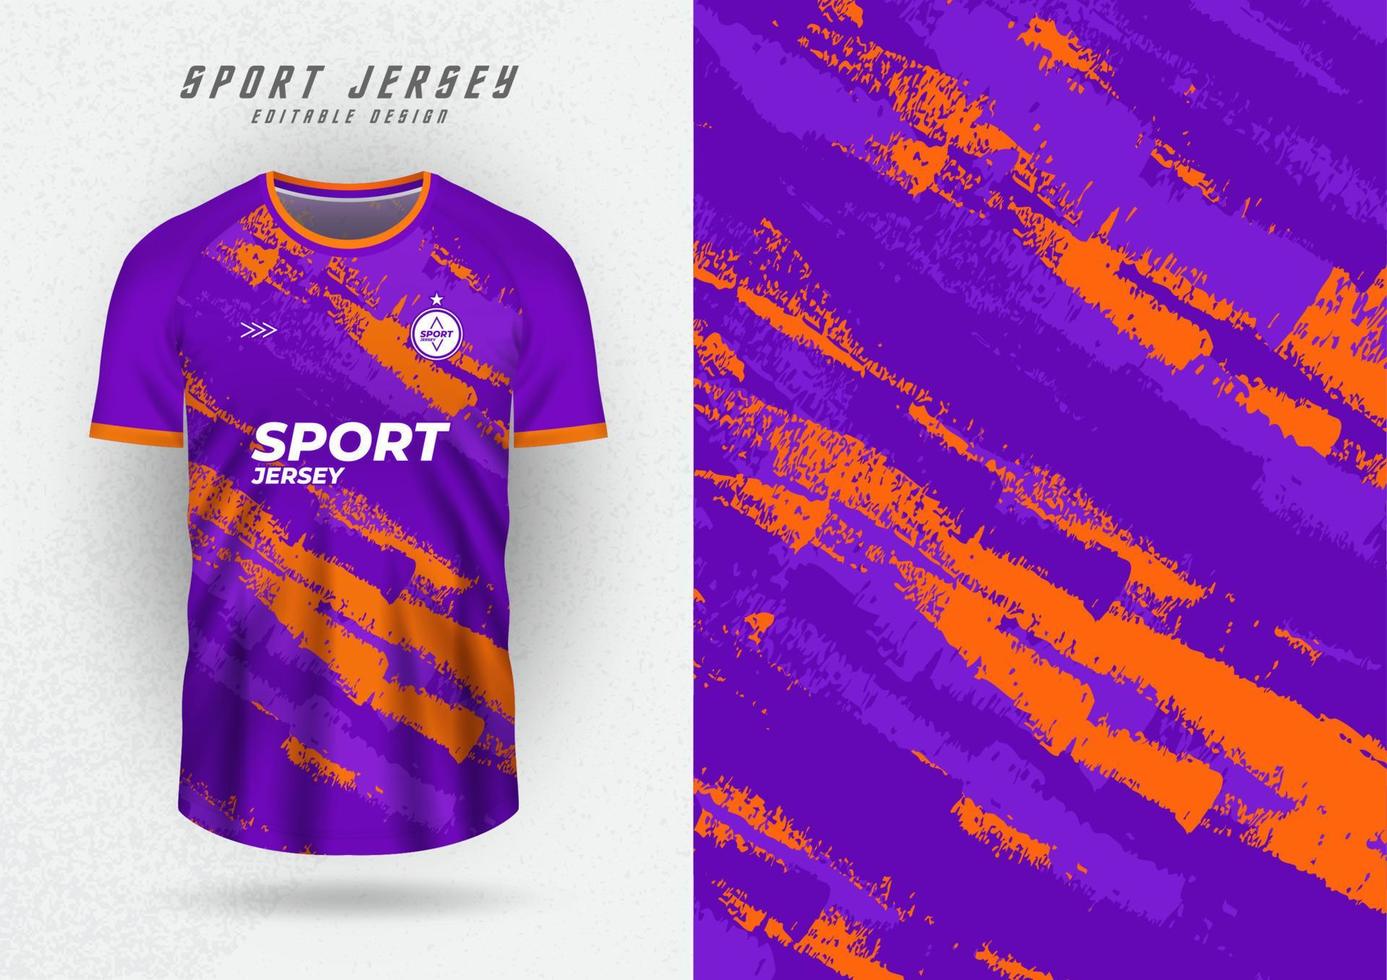 t-shirt design background for team jersey racing cycling football game grunge pattern purple orange vector